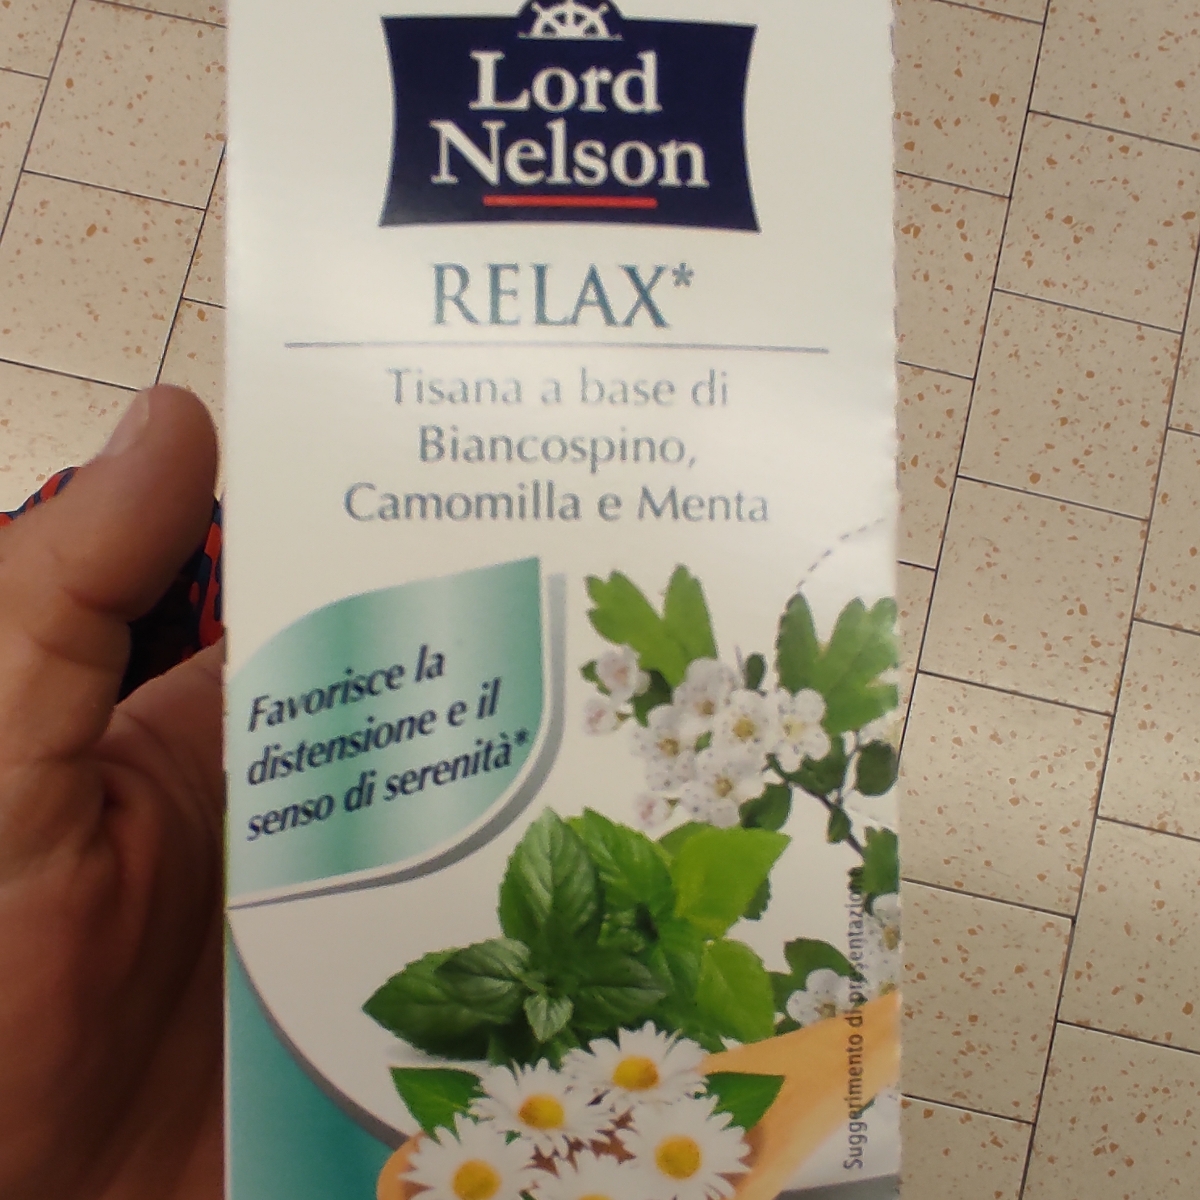 Lord Nelson Relax Reviews